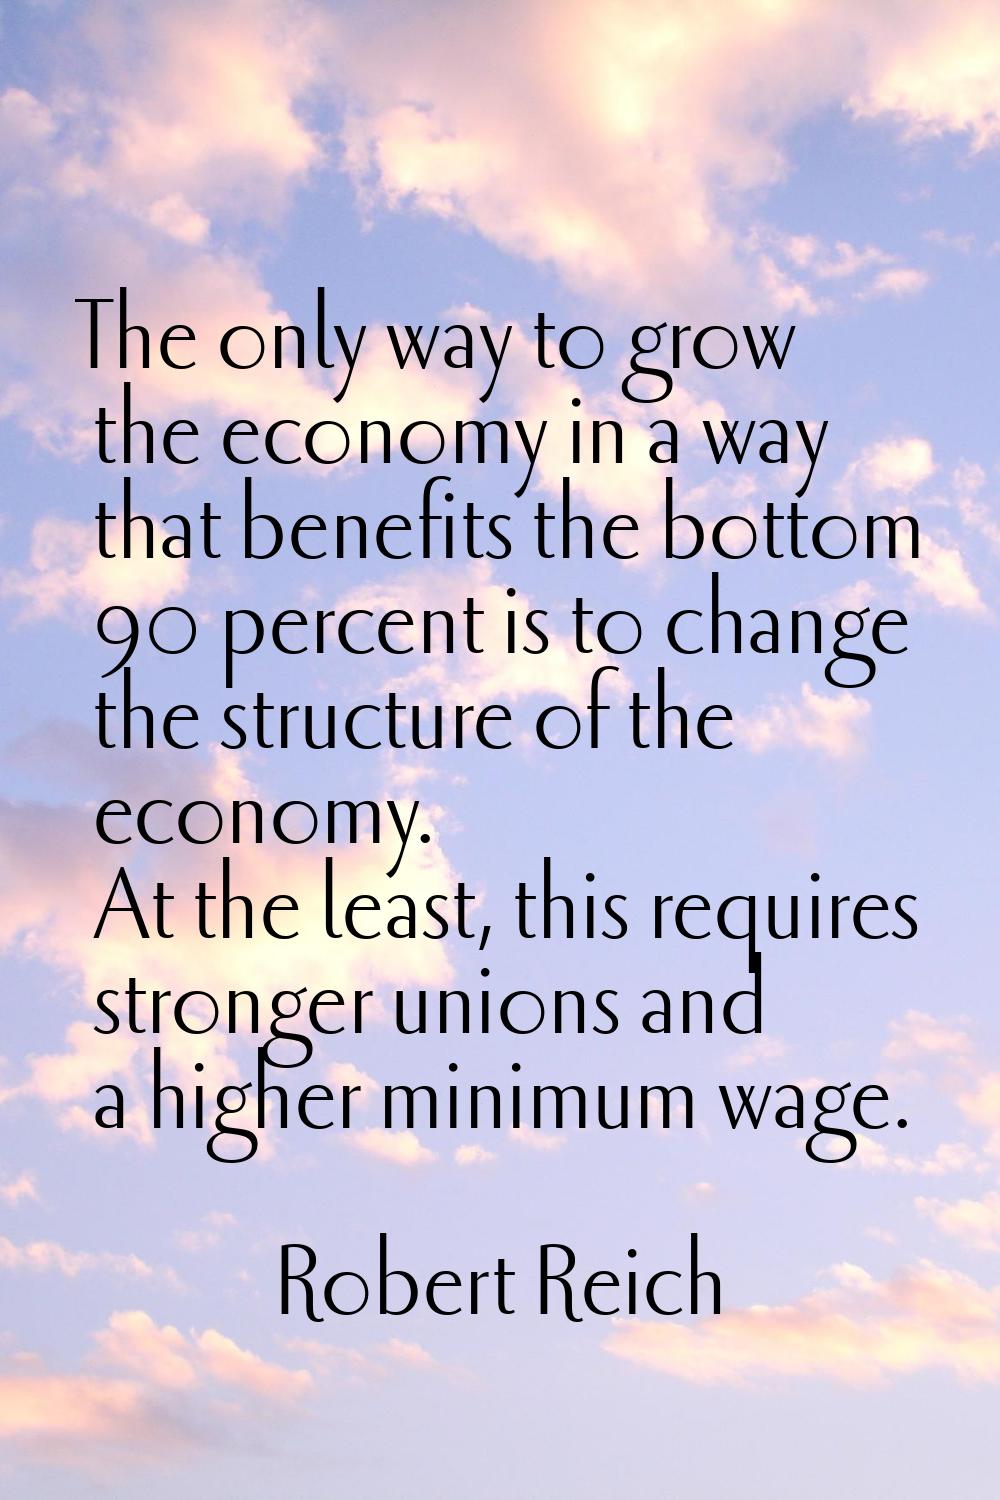 The only way to grow the economy in a way that benefits the bottom 90 percent is to change the stru